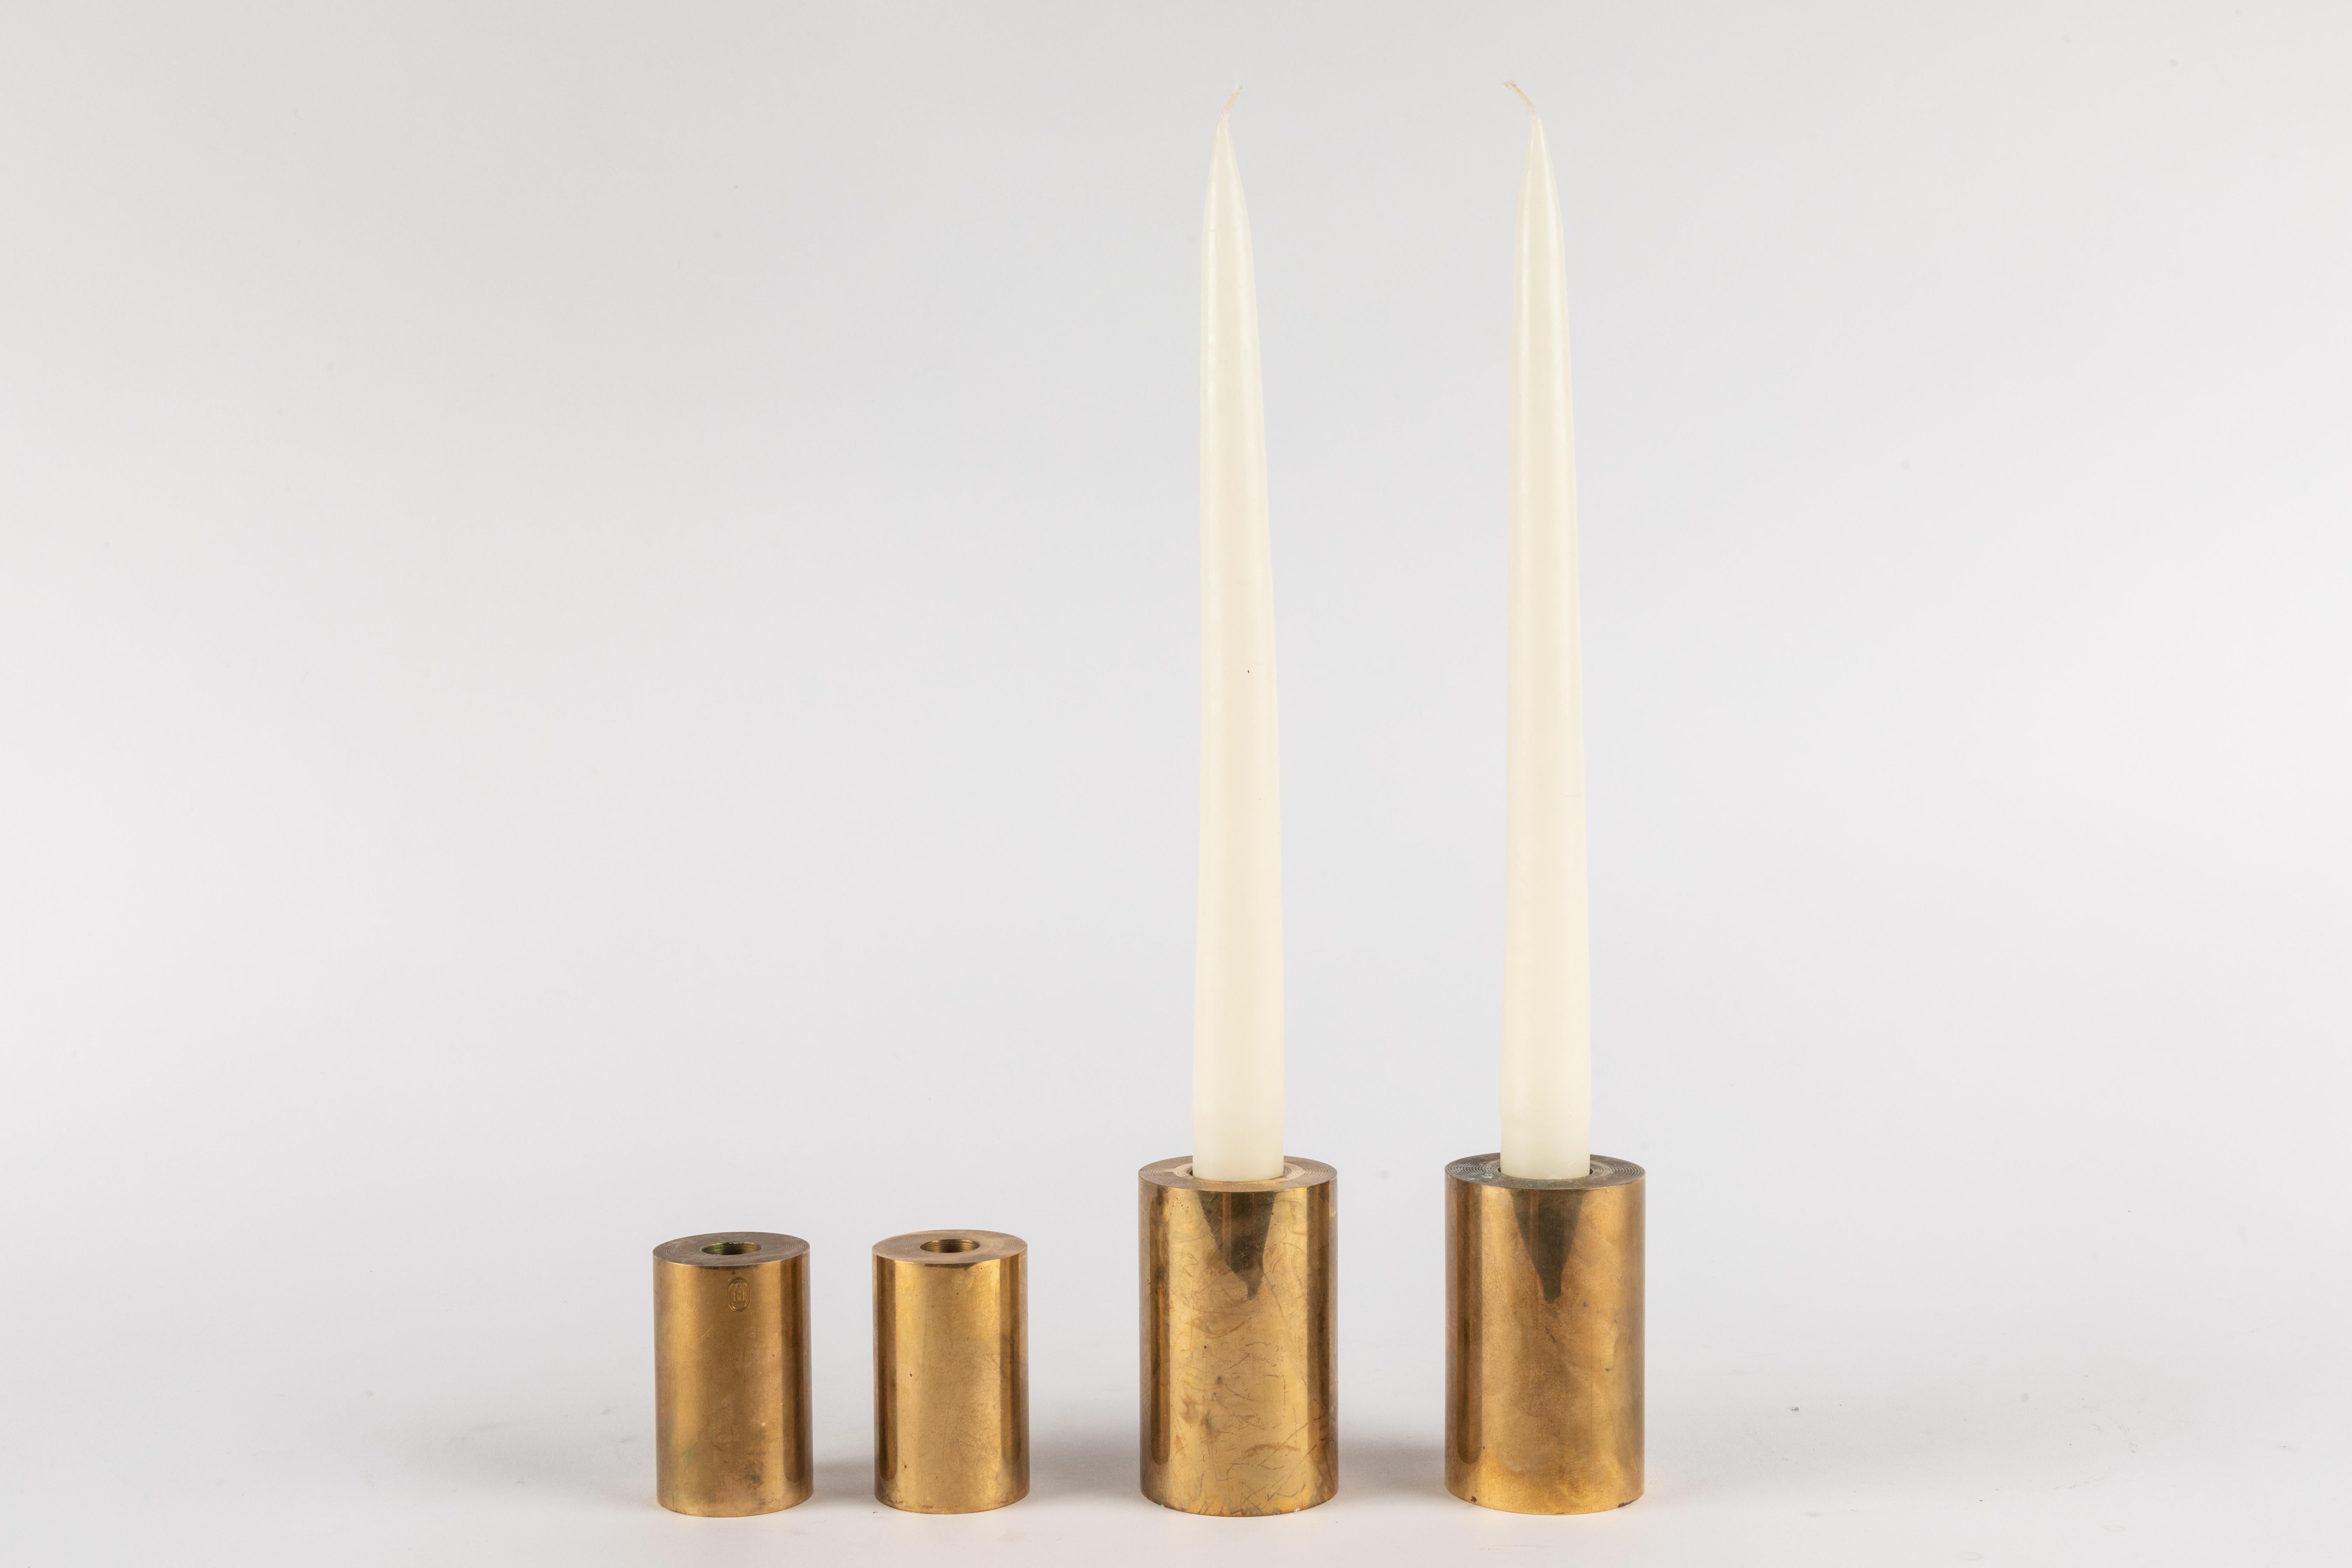 Set of 4 Swedish Metallslöjden Gusum brass candlesticks. One of his most noteworthy and iconic designs. Quintessentially Scandinavian modern in its execution and inherent aesthetics. Executed in solid cylindrical brass, this ultra refined design